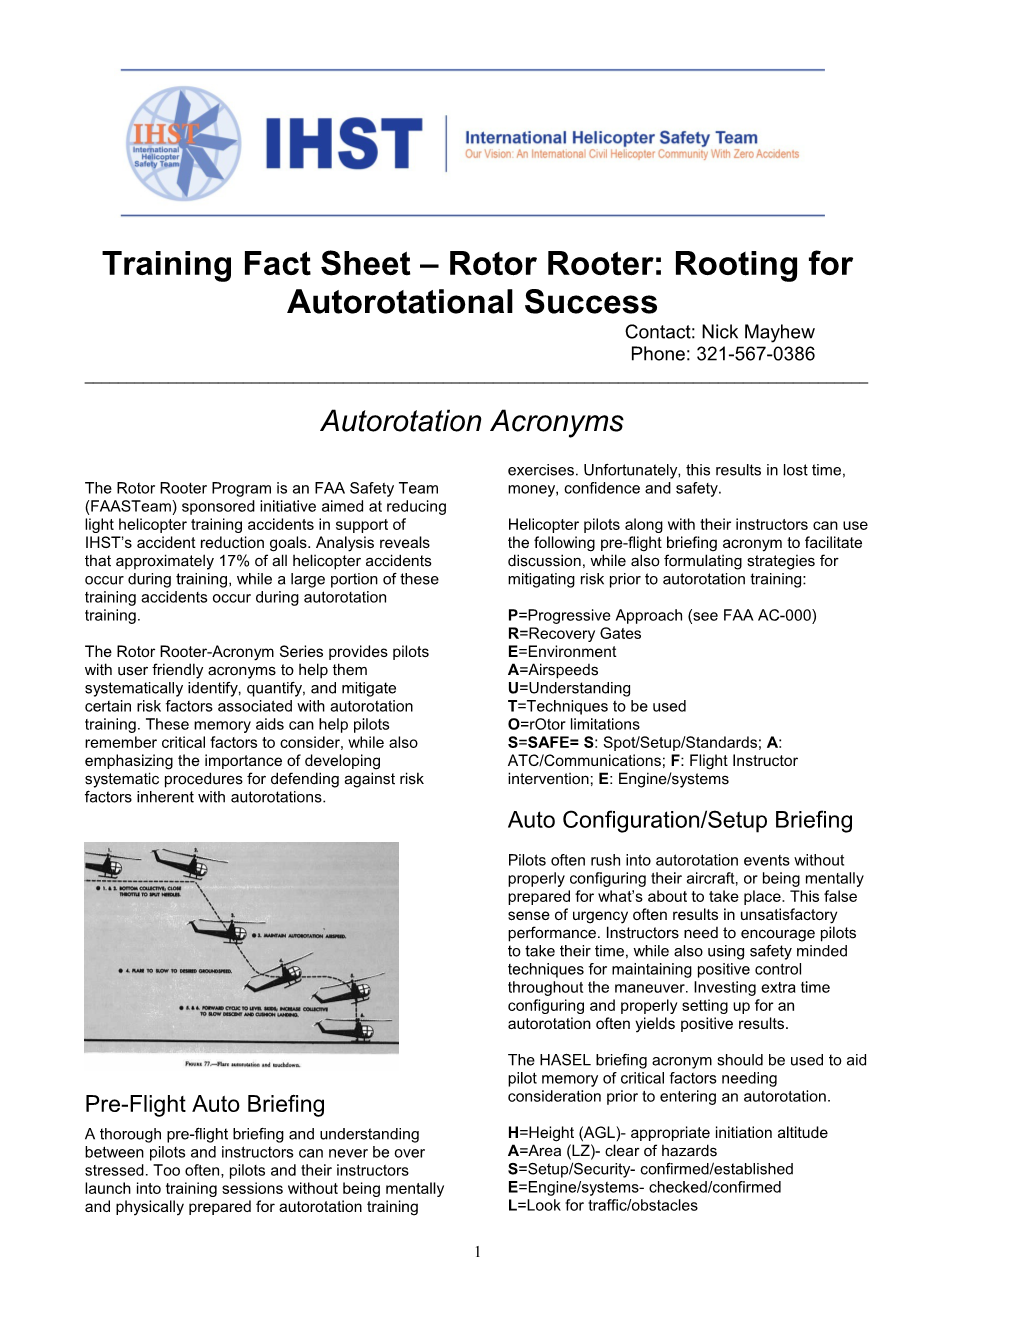 Training Fact Sheet Rotor Rooter: Rooting for Autorotational Success